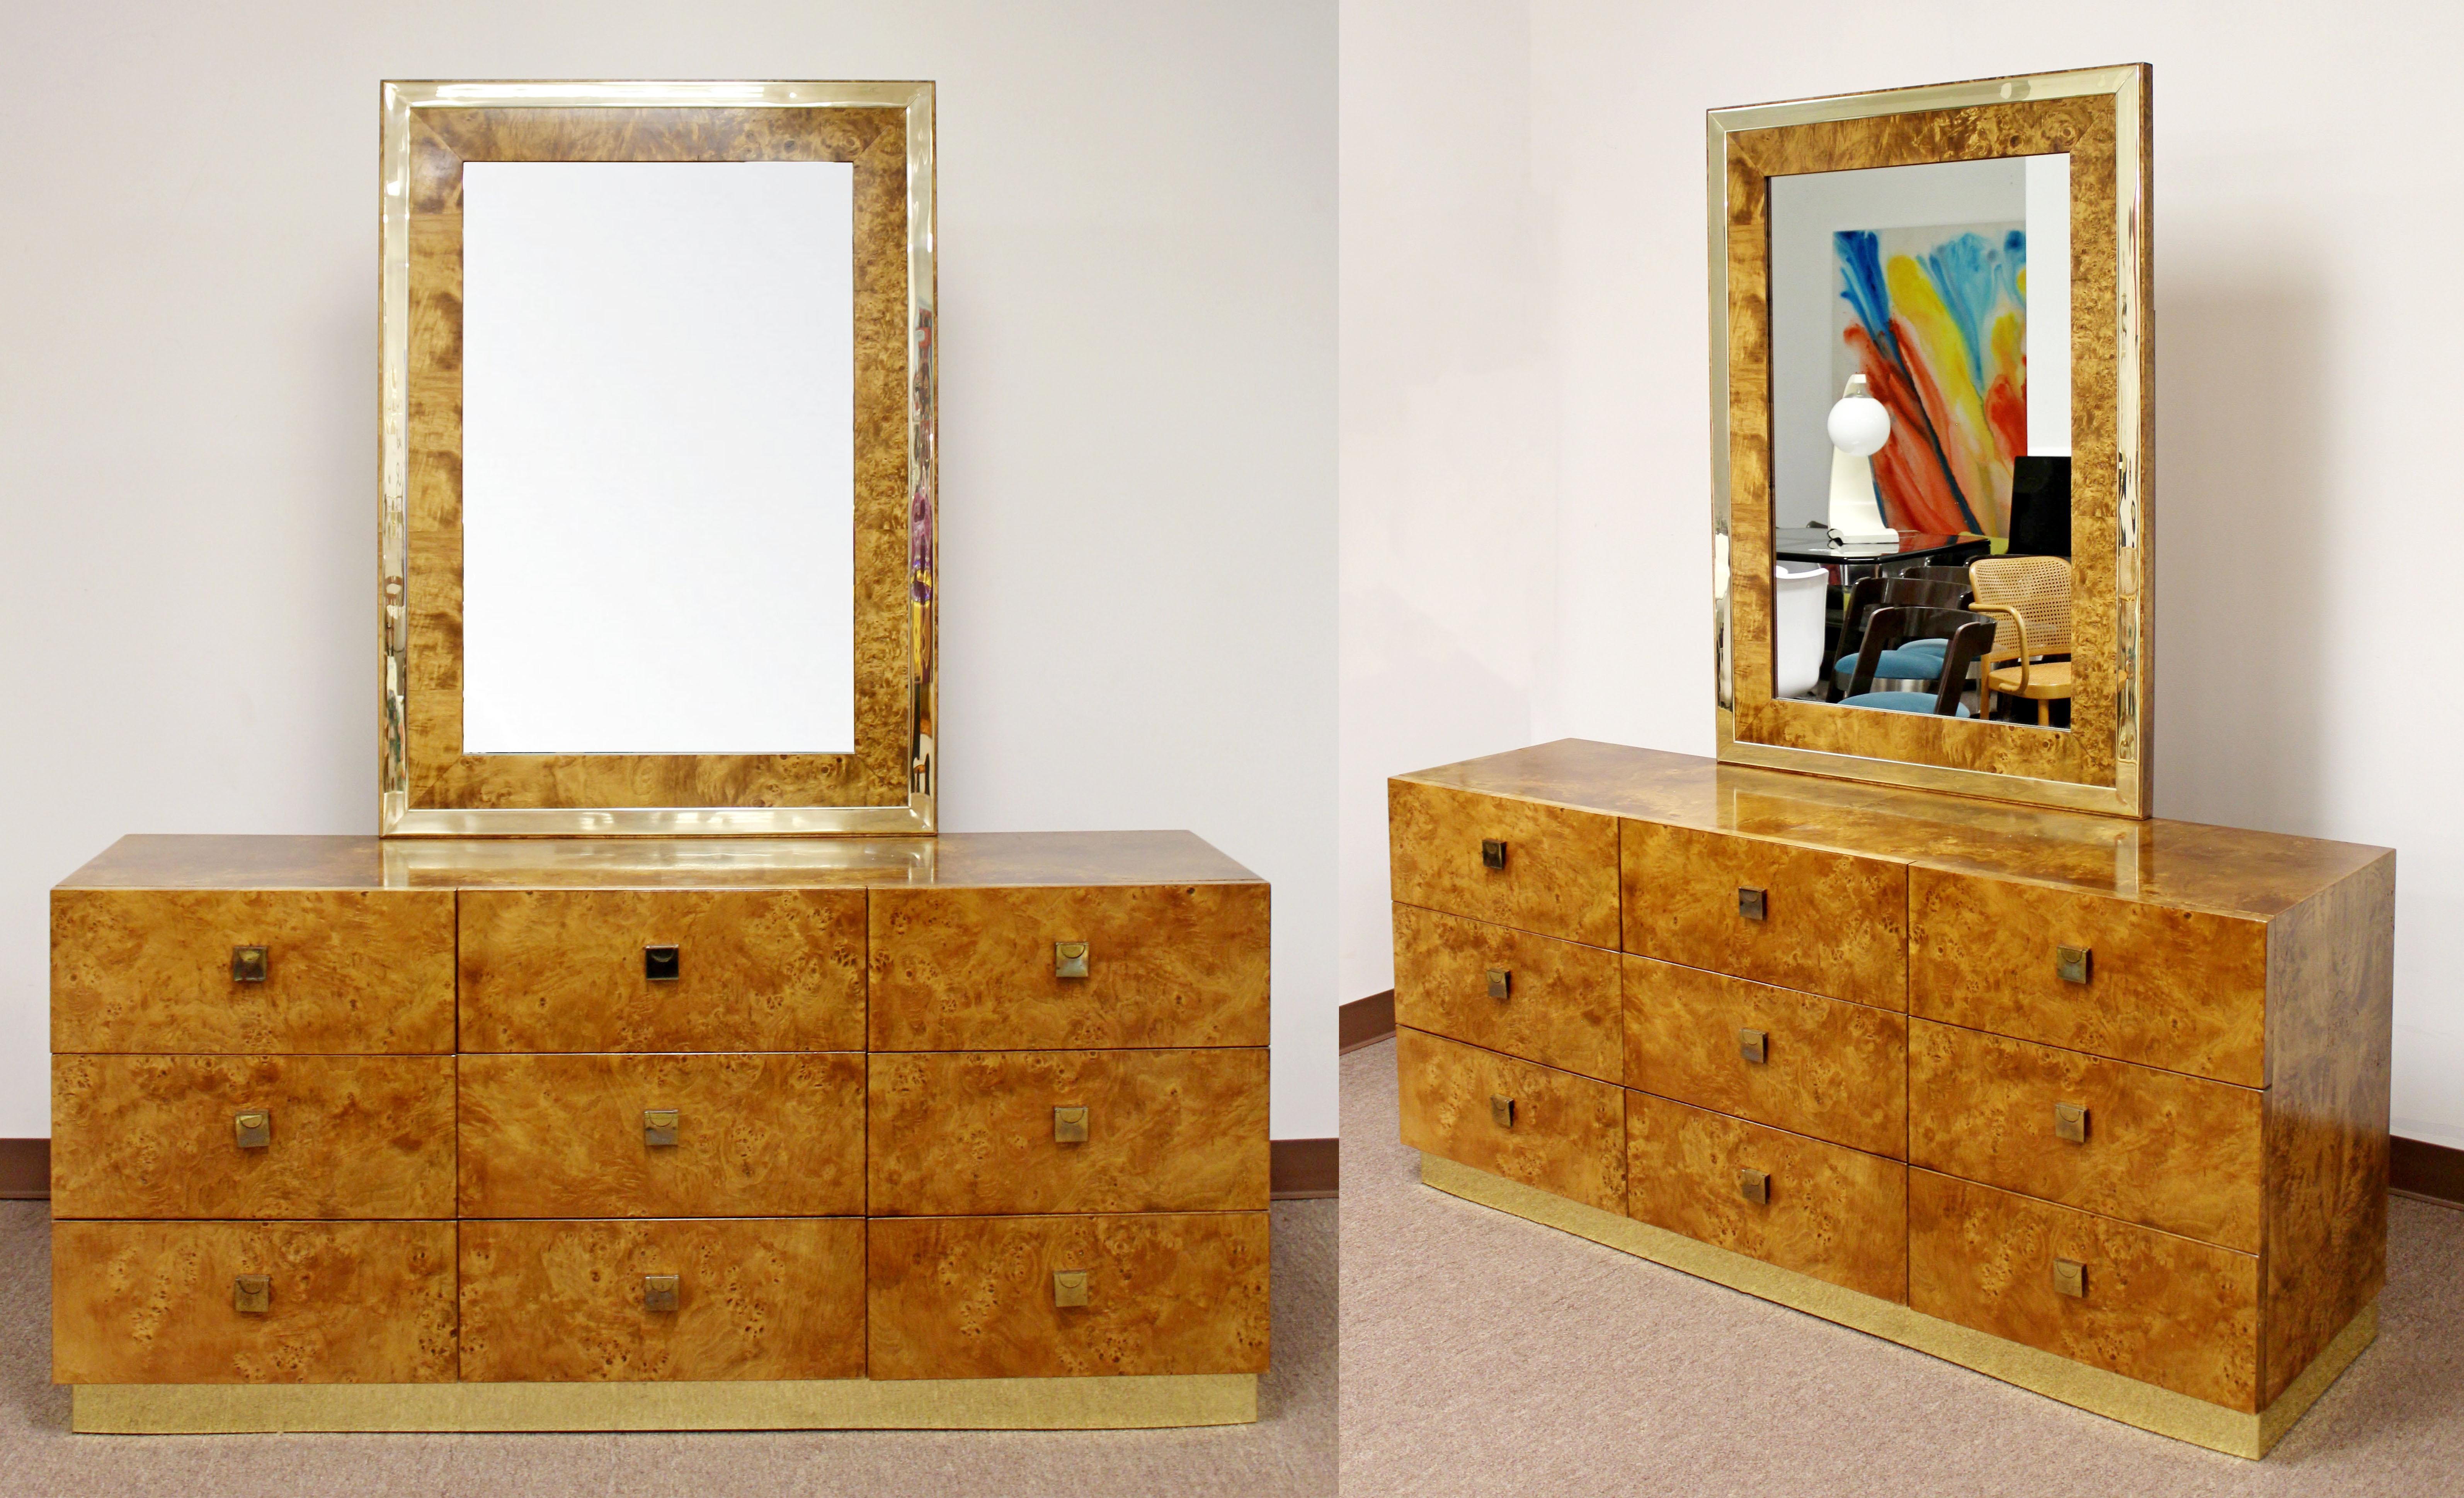 For your consideration is an absolutely breathtaking bedroom set, made of burl wood and brass, by Milo Baughman for Founders, circa 1970s. Set includes a highboy dresser, a lowboy with attached mirror, a nightstand and a queen headboard. In